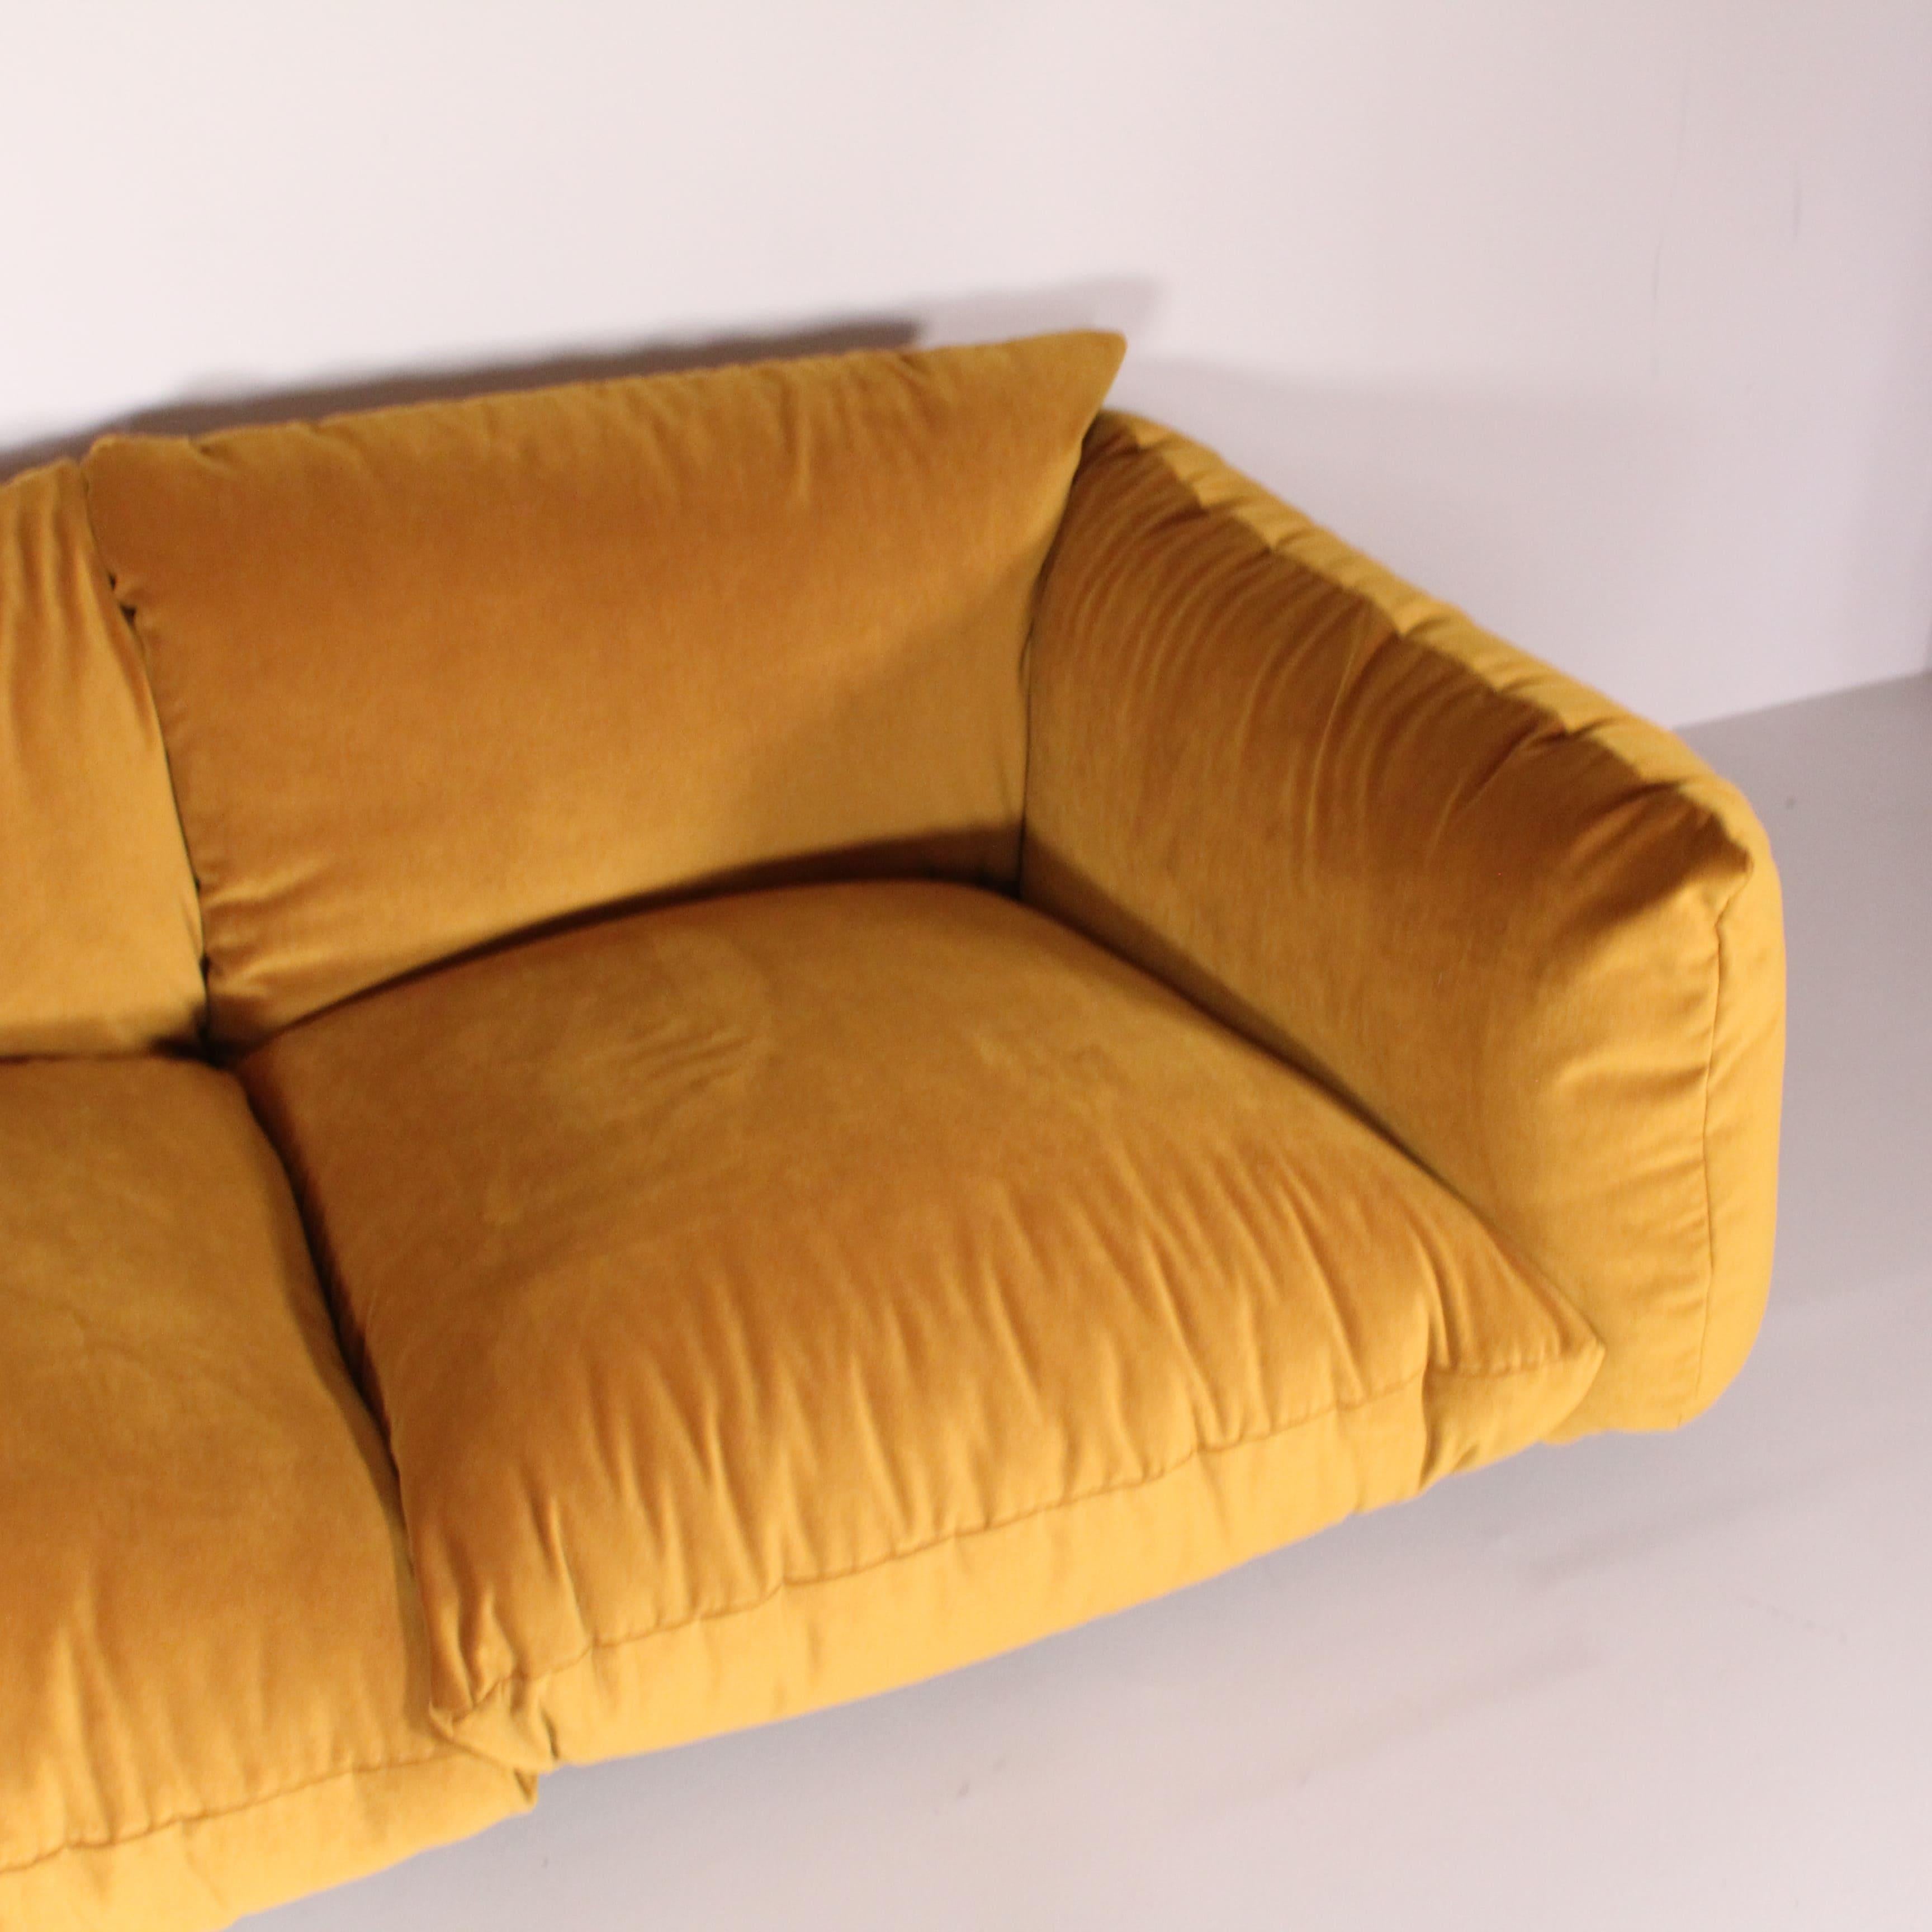 Marenco sofa and 2 armchairs set, Mario Marenco for Arflex, 1970 For Sale 9